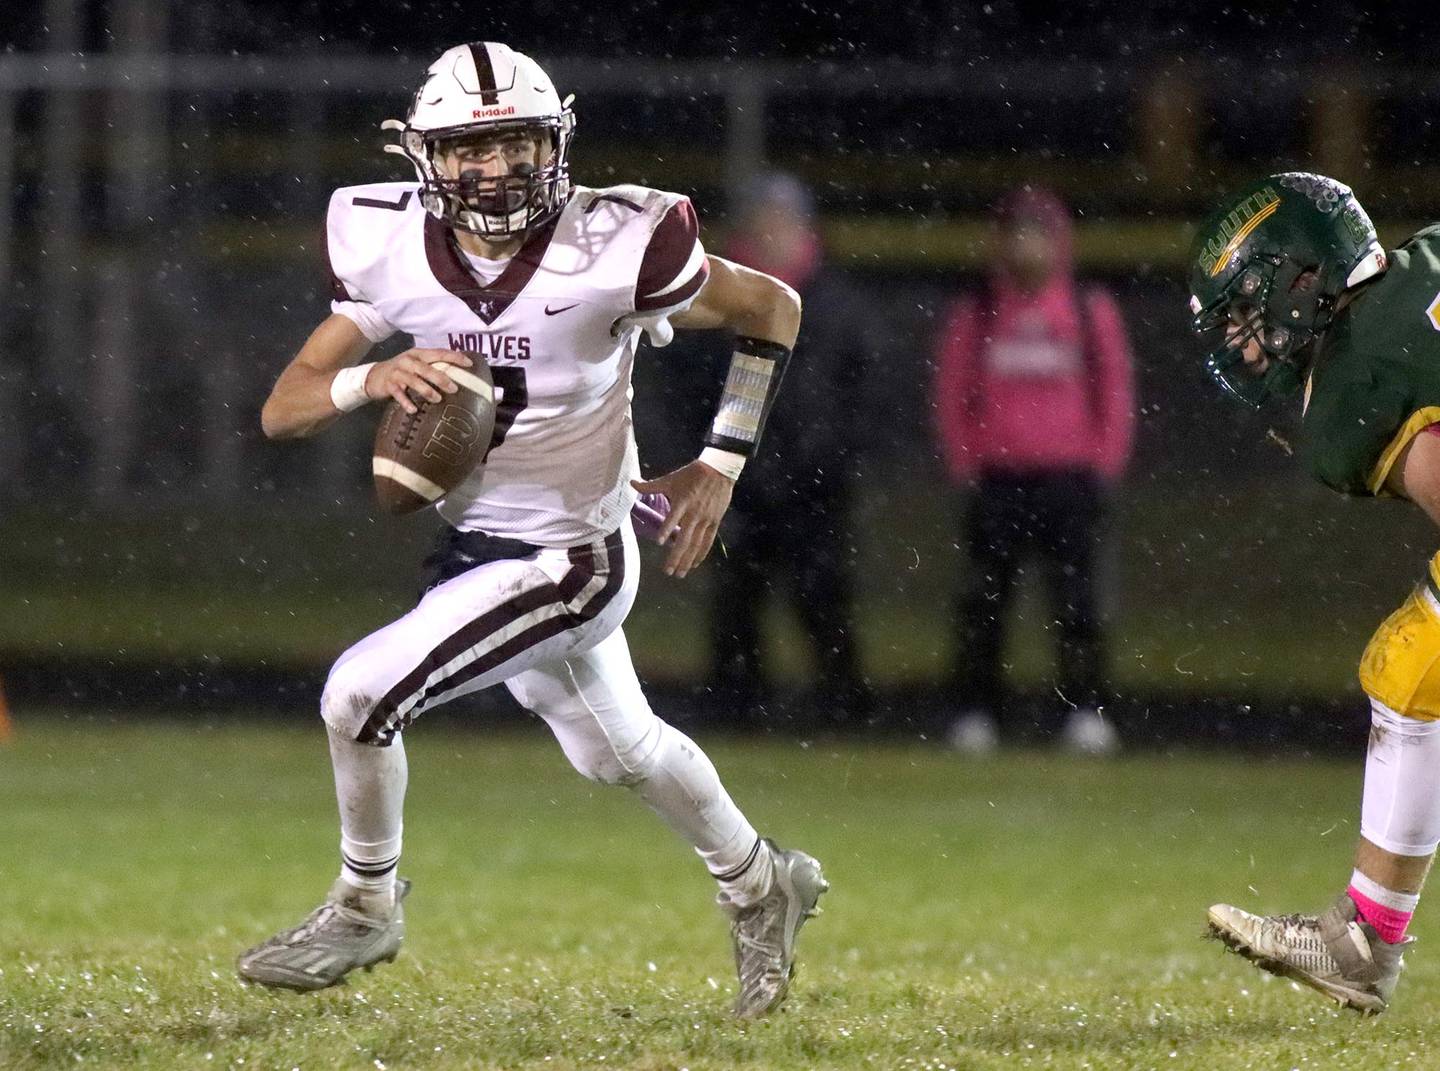 Prairie Ridge’s Tyler Vasey scrambles in varsity football action at Ken Bruhn Field on the campus of Crystal Lake South Friday evening.